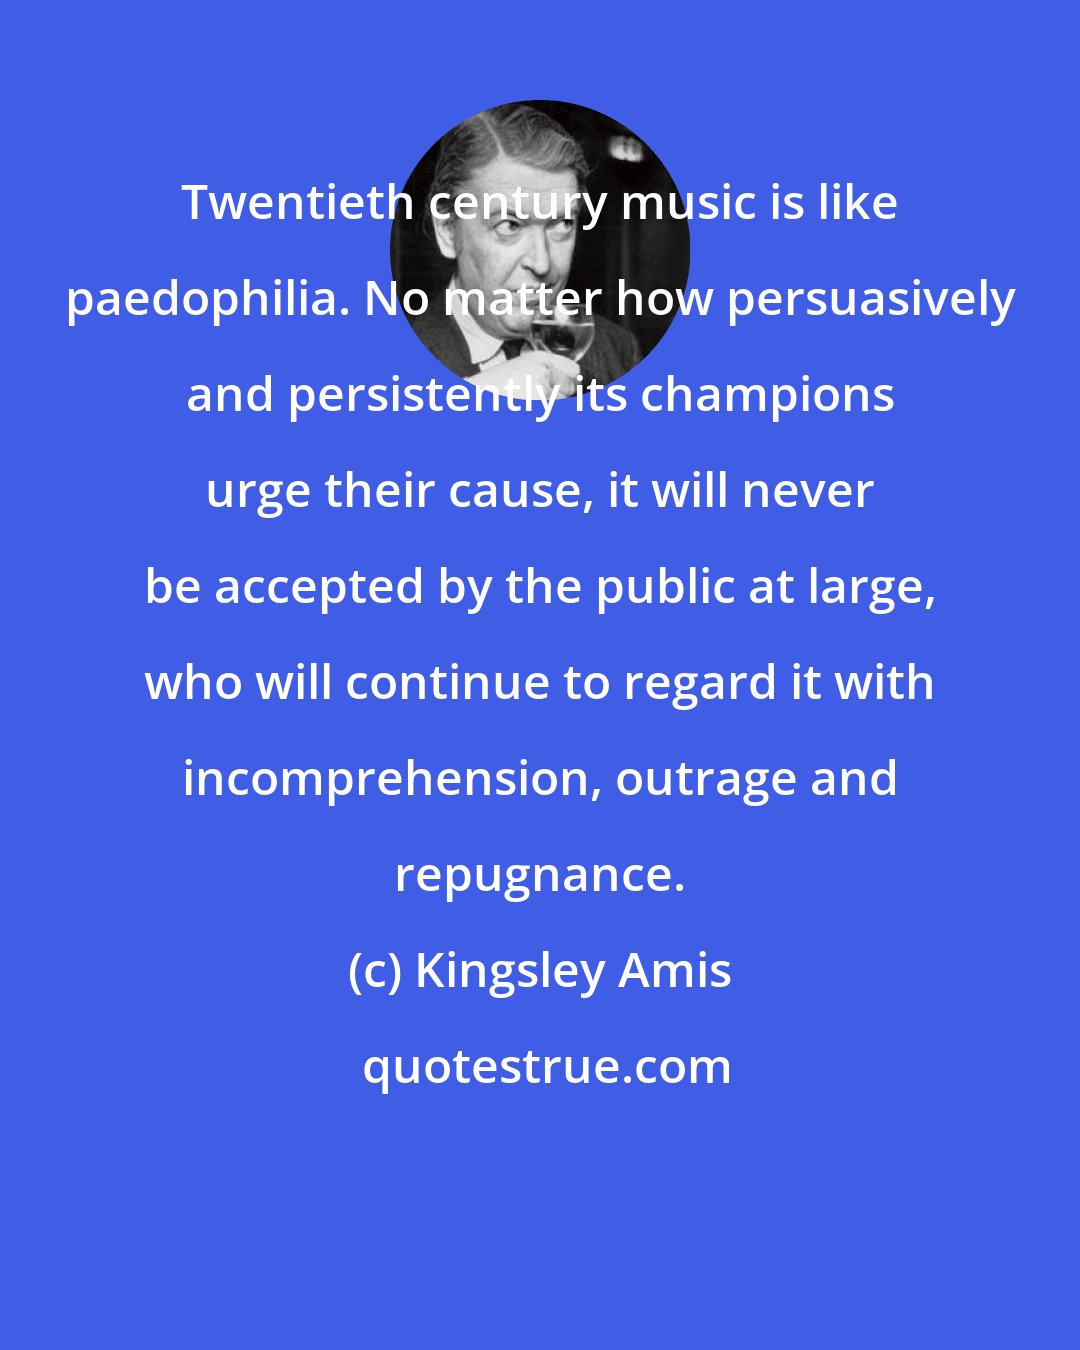 Kingsley Amis: Twentieth century music is like paedophilia. No matter how persuasively and persistently its champions urge their cause, it will never be accepted by the public at large, who will continue to regard it with incomprehension, outrage and repugnance.